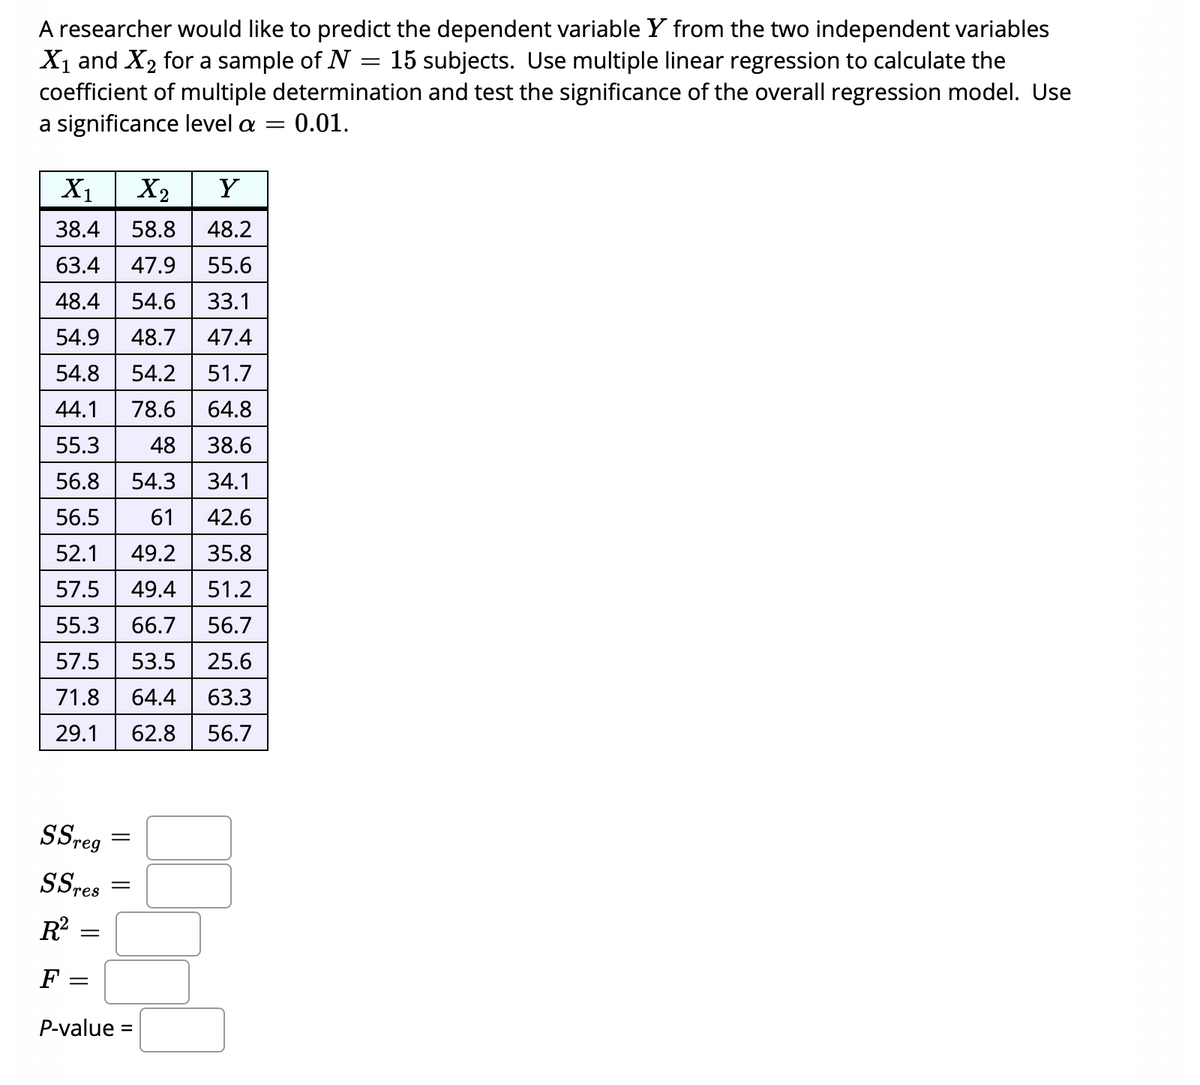 A researcher would like to predict the dependent variable Y from the two independent variables
X1 and X2 for a sample of N = 15 subjects. Use multiple linear regression to calculate the
coefficient of multiple determination and test the significance of the overall regression model. Use
a significance level a =
0.01.
X1
X2
Y
38.4
58.8
48.2
63.4
47.9
55.6
48.4
54.6
33.1
54.9
48.7
47.4
54.8
54.2
51.7
44.1
78.6
64.8
55.3
48
38.6
56.8
54.3
34.1
56.5
61
42.6
52.1
49.2
35.8
57.5
49.4
51.2
55.3
66.7
56.7
57.5
53.5
25.6
71.8
64.4
63.3
29.1
62.8
56.7
Sreg
SS.res
R
F
P-value =
